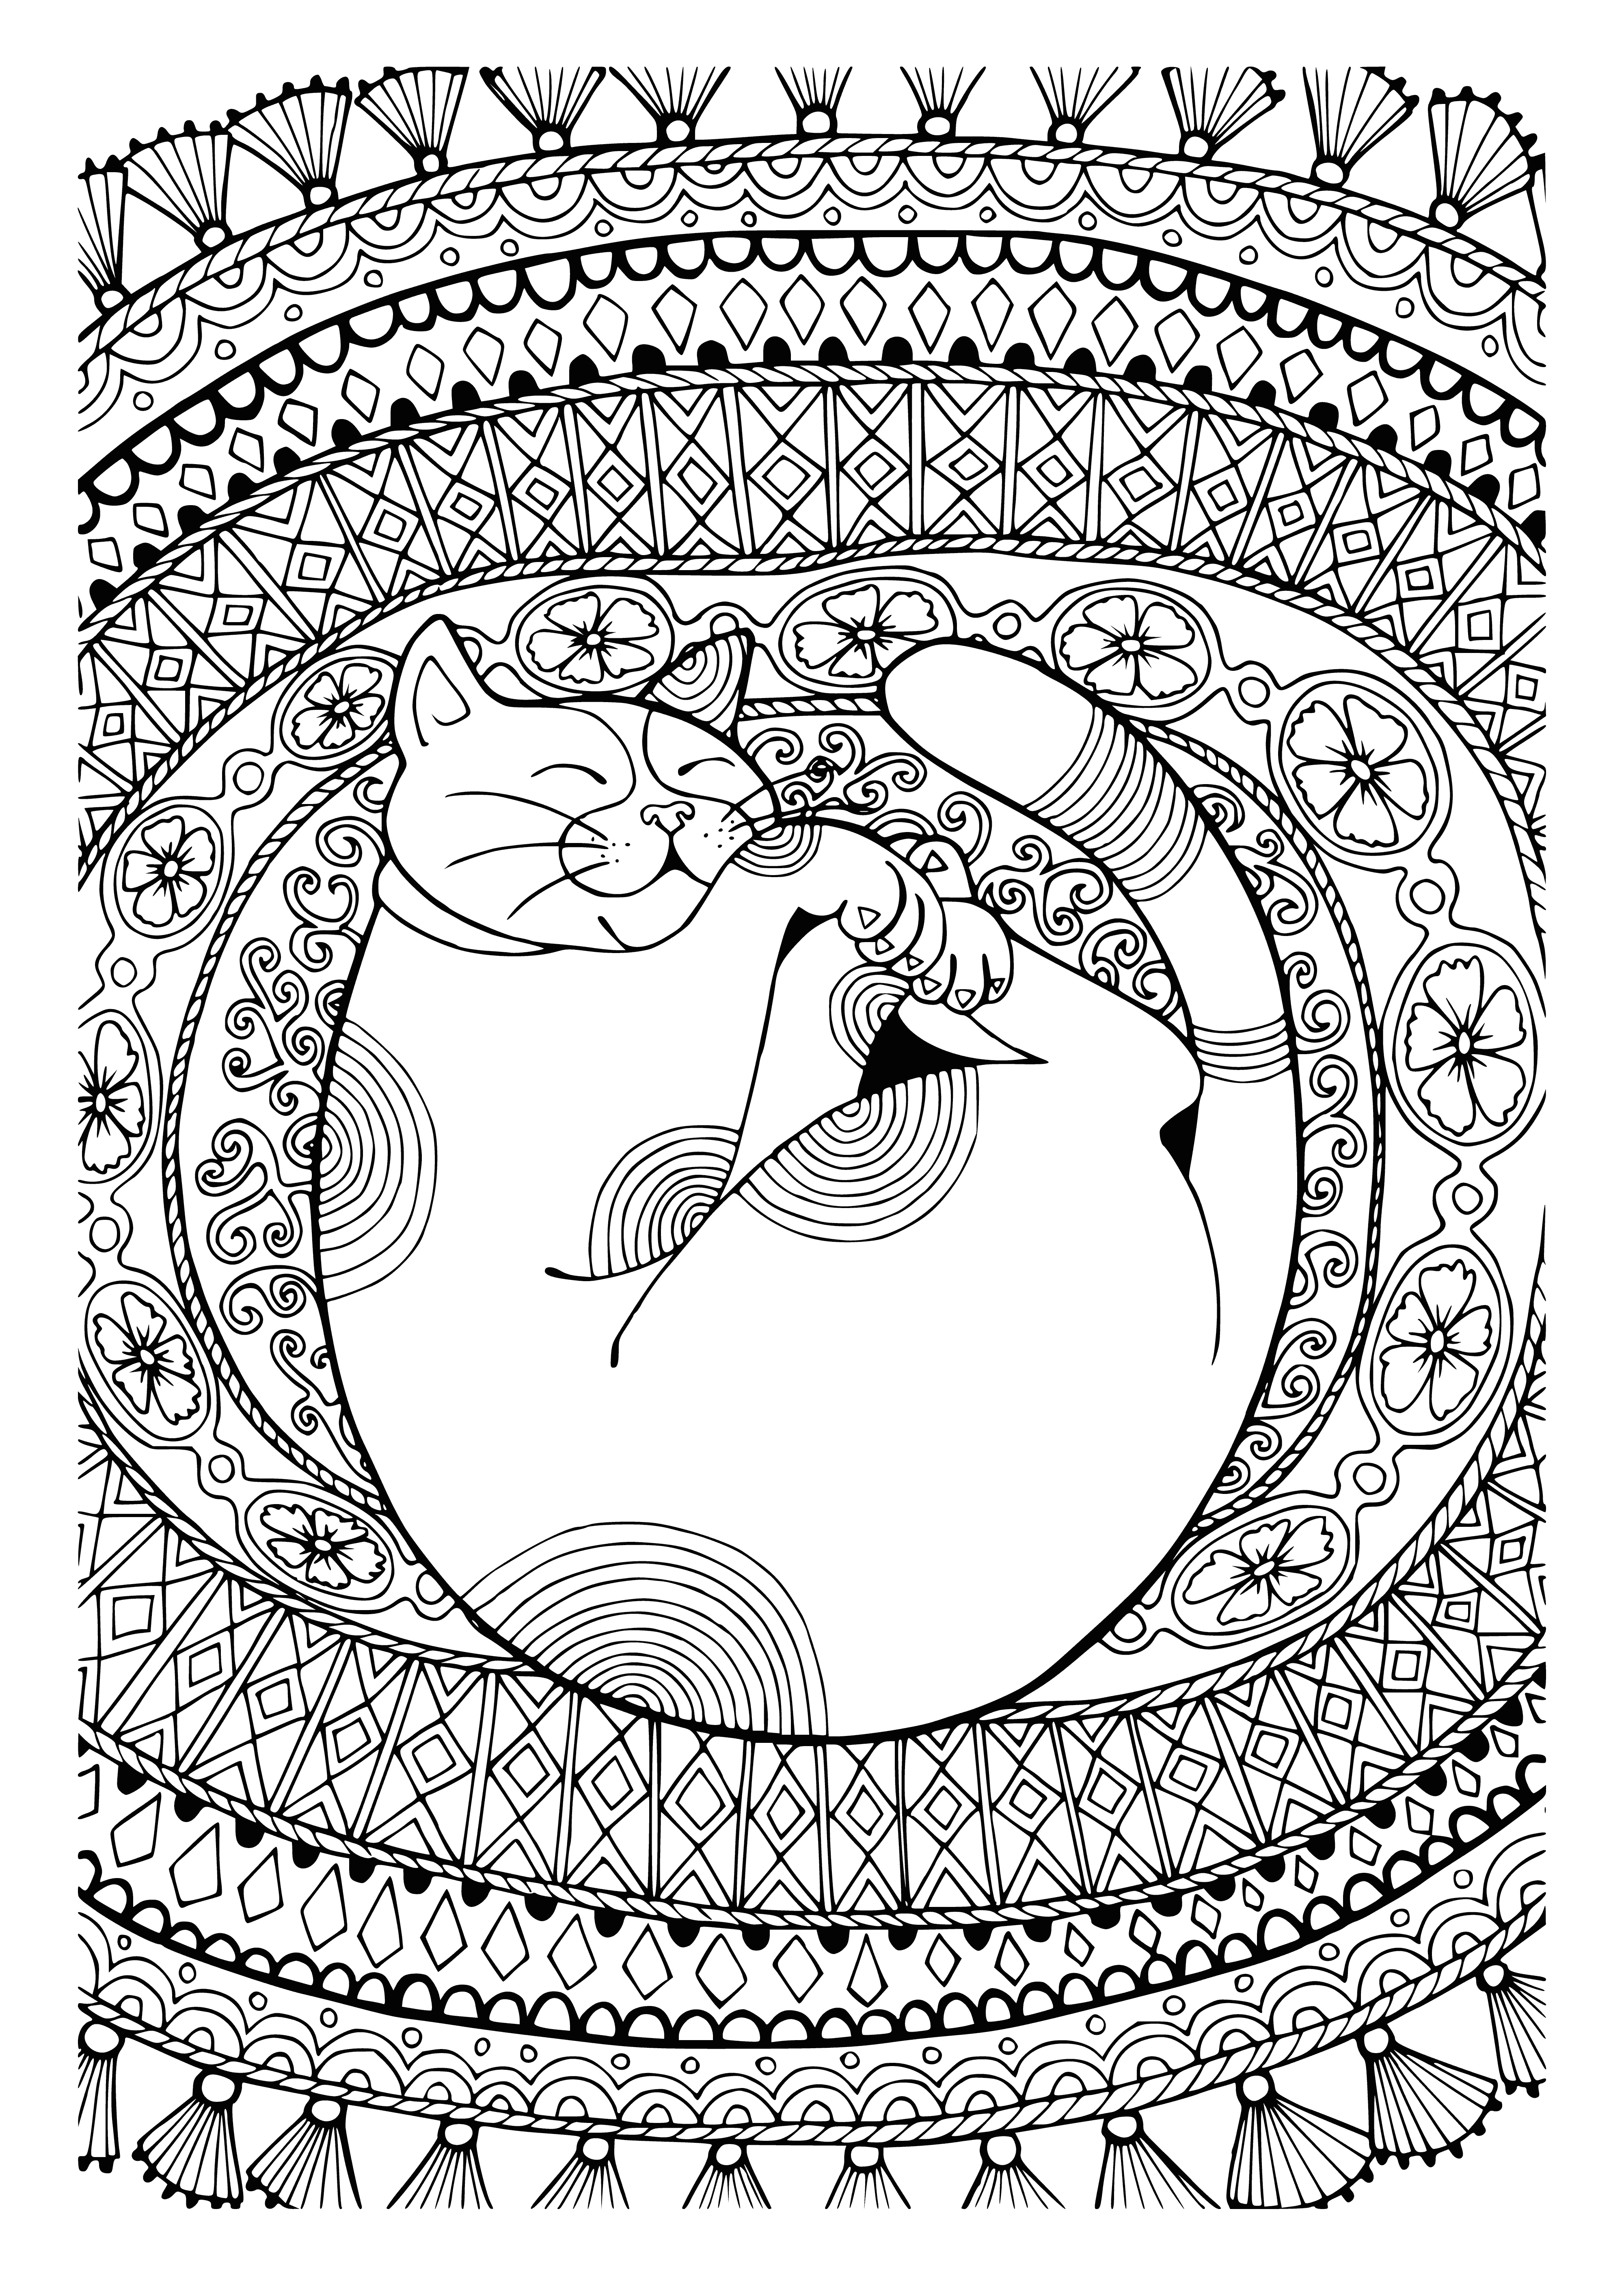 The cat is curled up in a ball coloring page